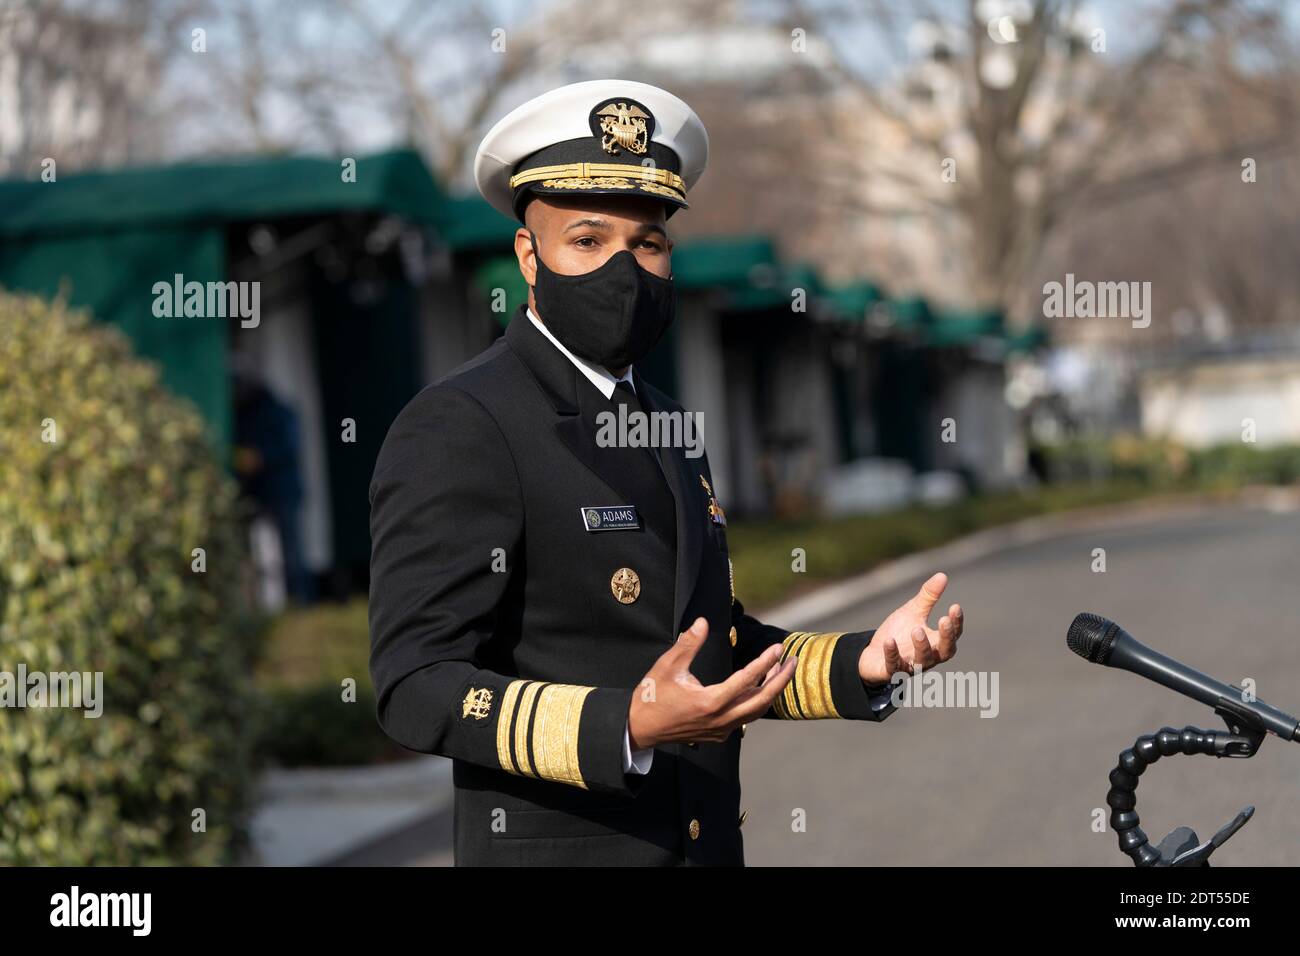 Surgeon General of the United States VADM Jerome M. Adams, M.D., M.P.H speaks to the media at the White House, in Washington, DC, December 21, 2020. Credit: Chris Kleponis/Pool via CNP /MediaPunch Stock Photo